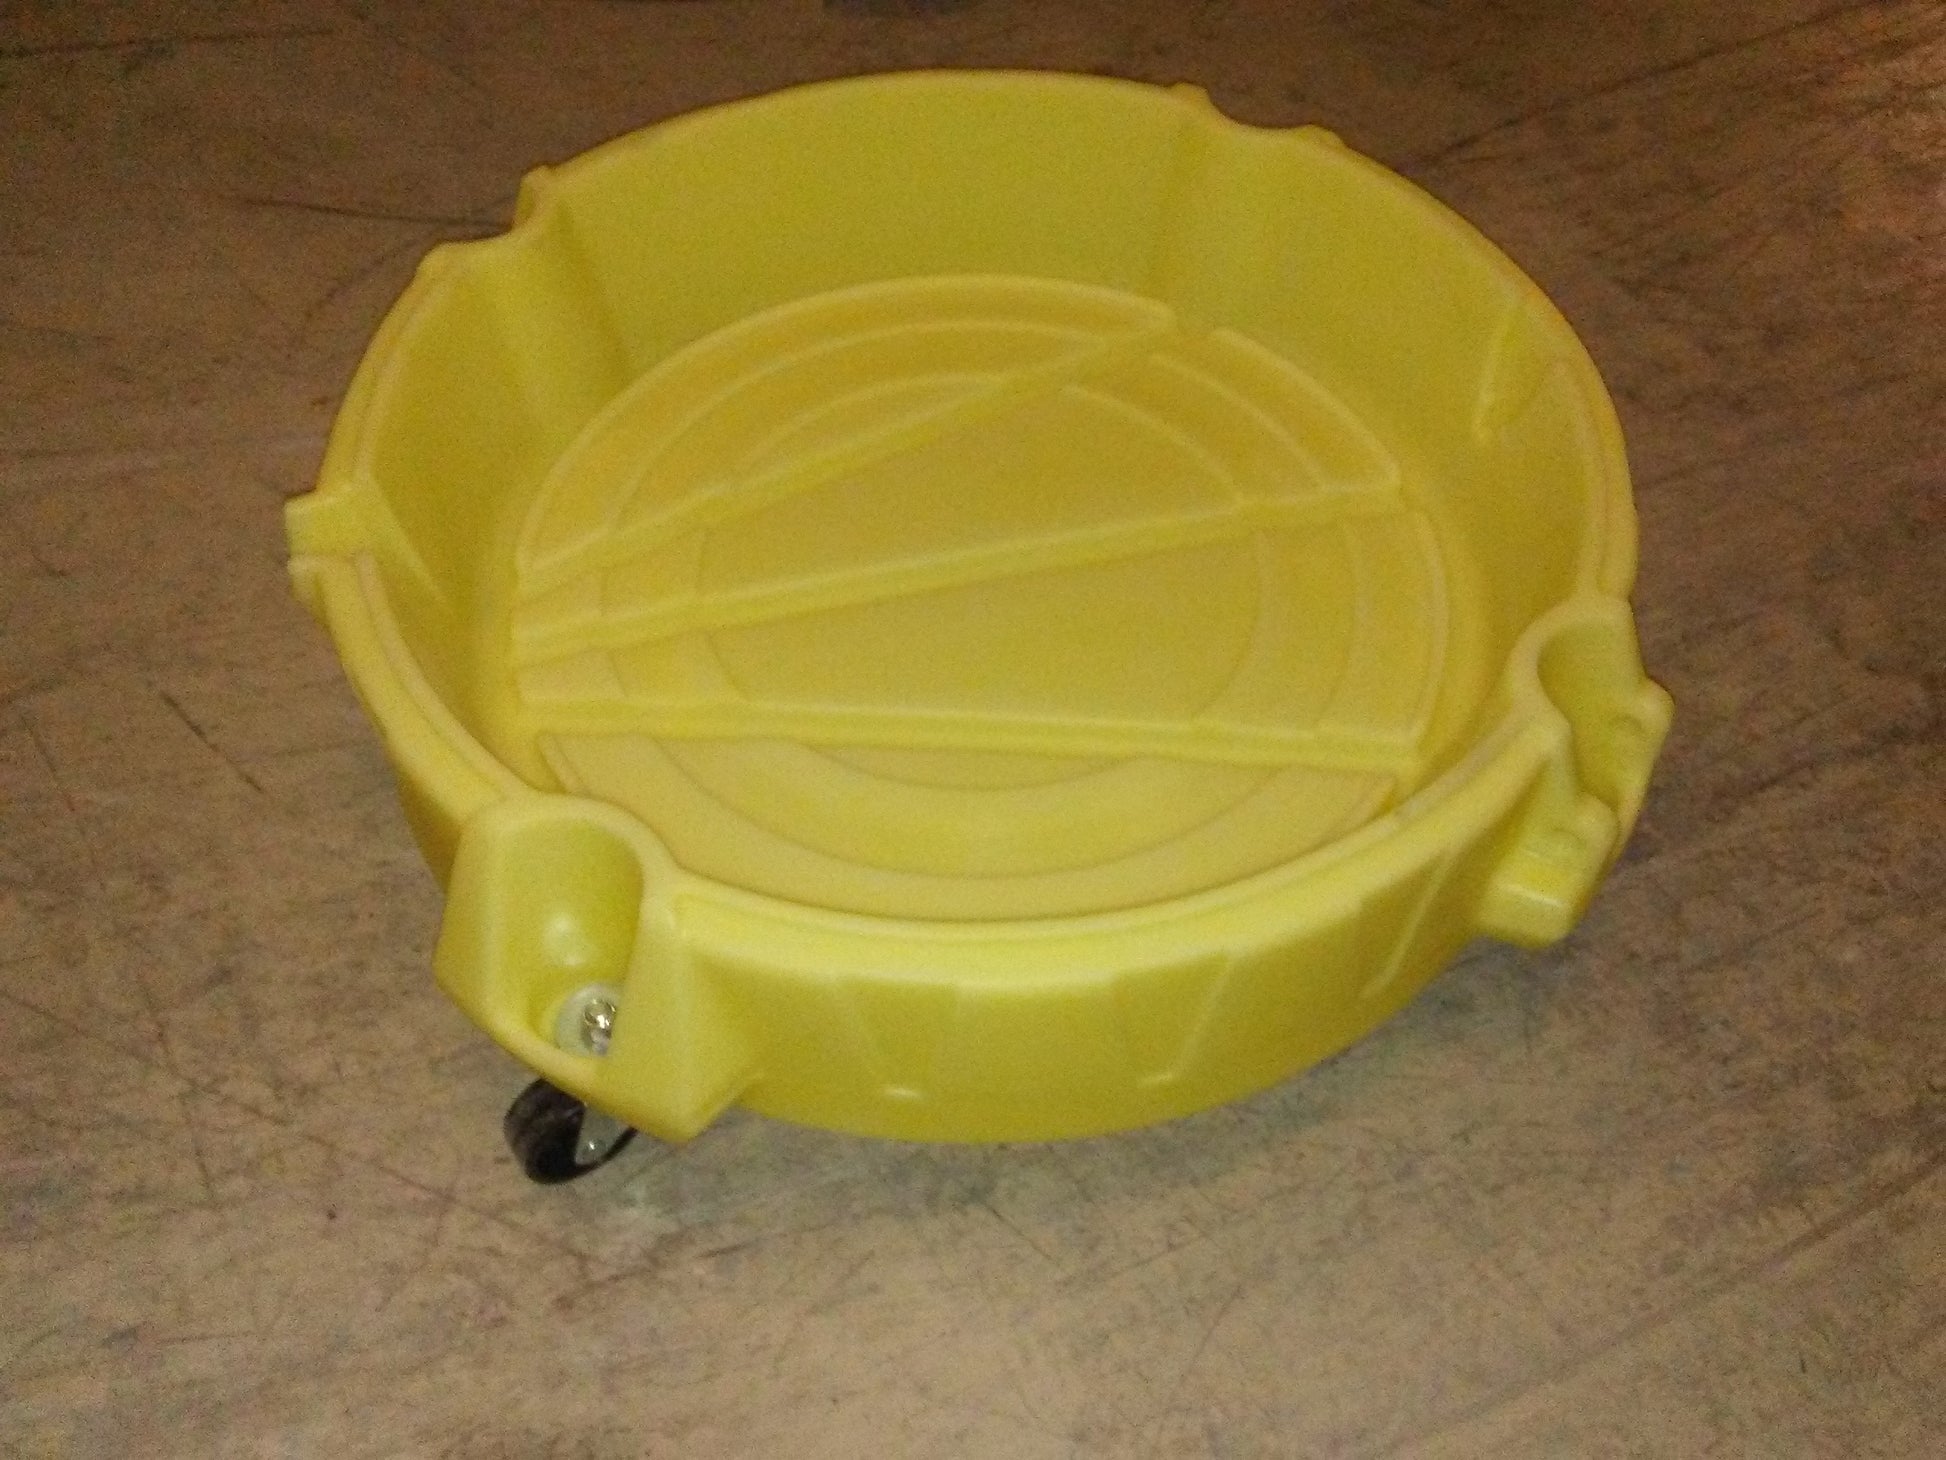 SPILL COLLECTION SYSTEM, YELLOW, 500 LB.